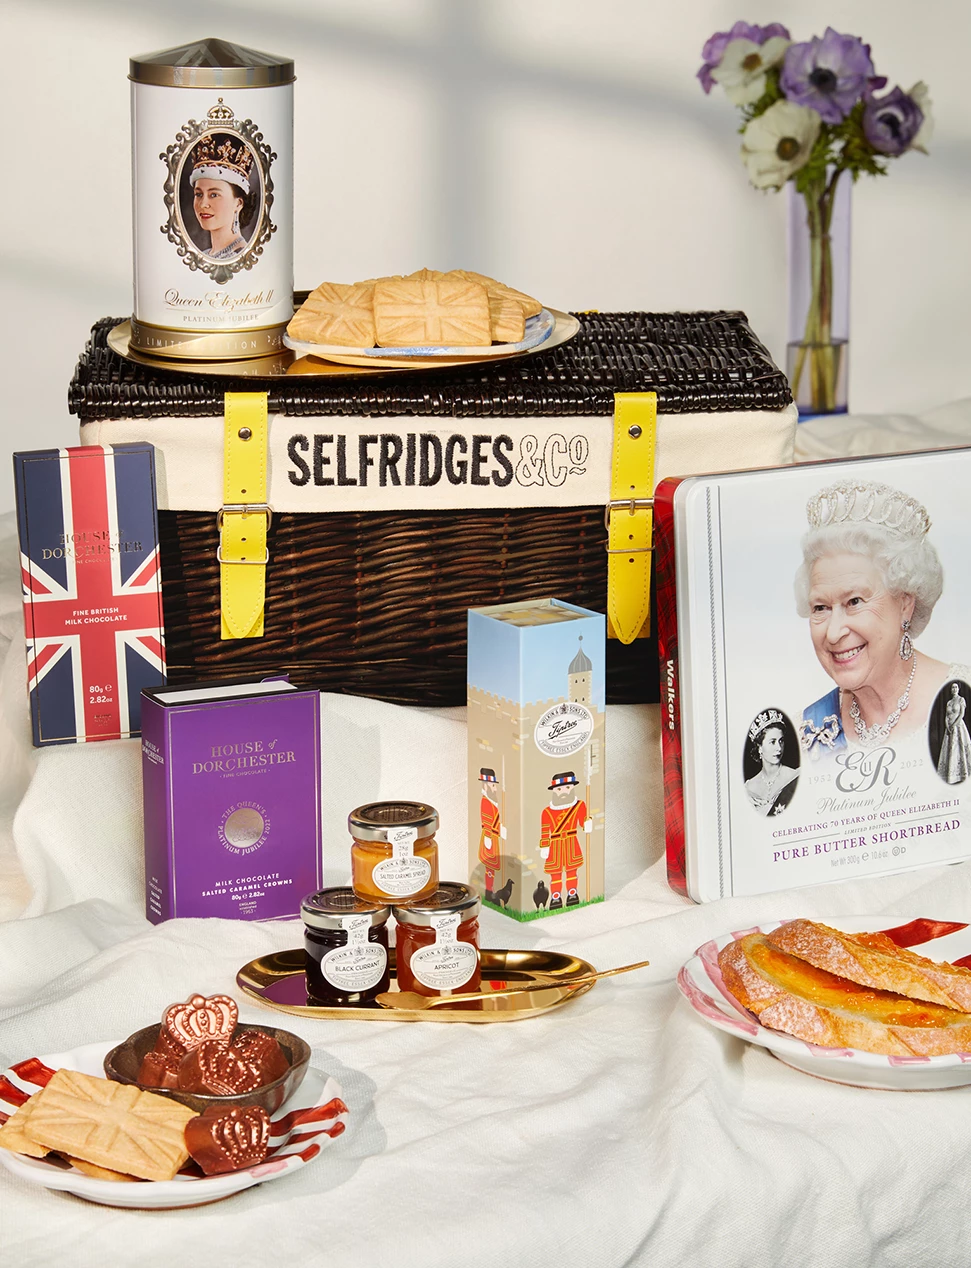 7 Of The Most Decadent Platinum Jubilee Hampers To Toast Her Majesty In Style